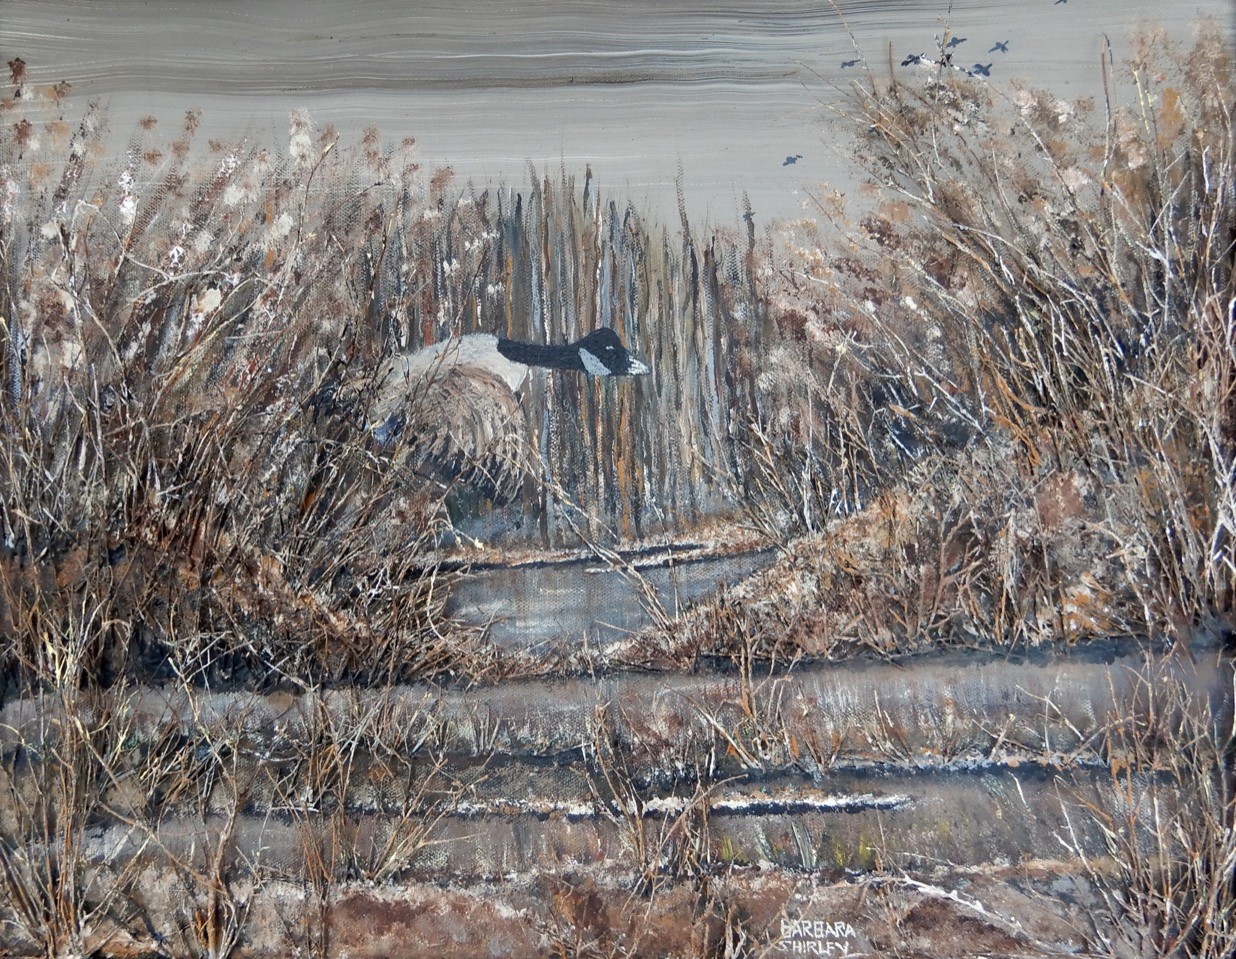 A fairly realistic drawing portrays a goose about to take flight from a marshland, in a landscape with water, reeds and grasses. The colors of the artwork are browns, white, grays and other fall or winter colors.